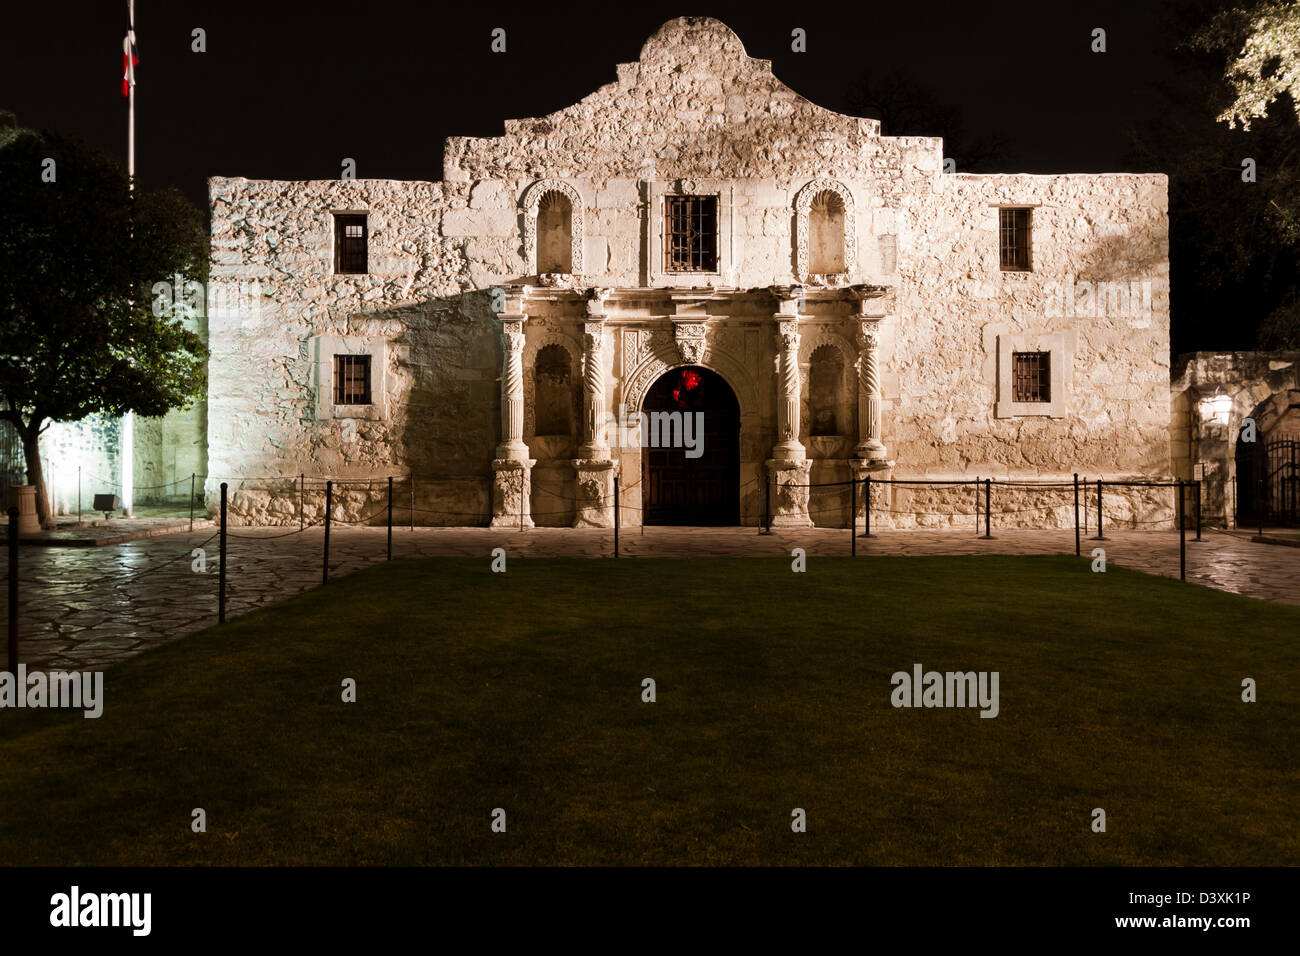 The Alamo mission in San Antonio Missions National park , Texas Stock Photo